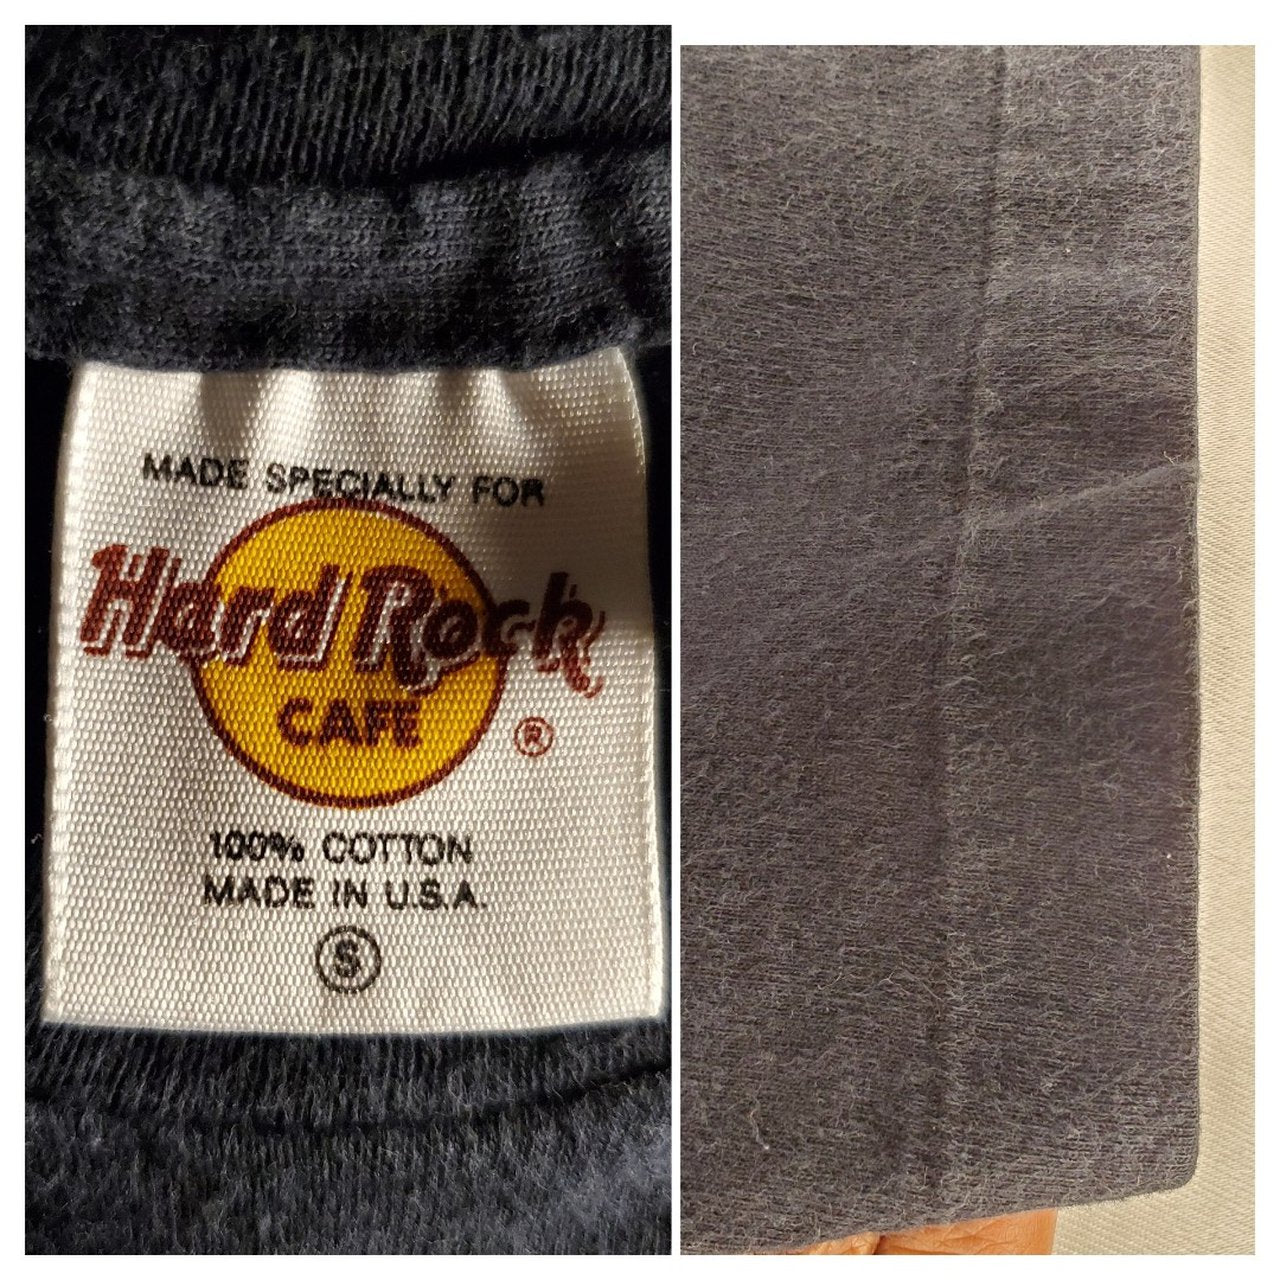 Vintage 90s "Hard Rock Cafe Chicago" Spellout Tee